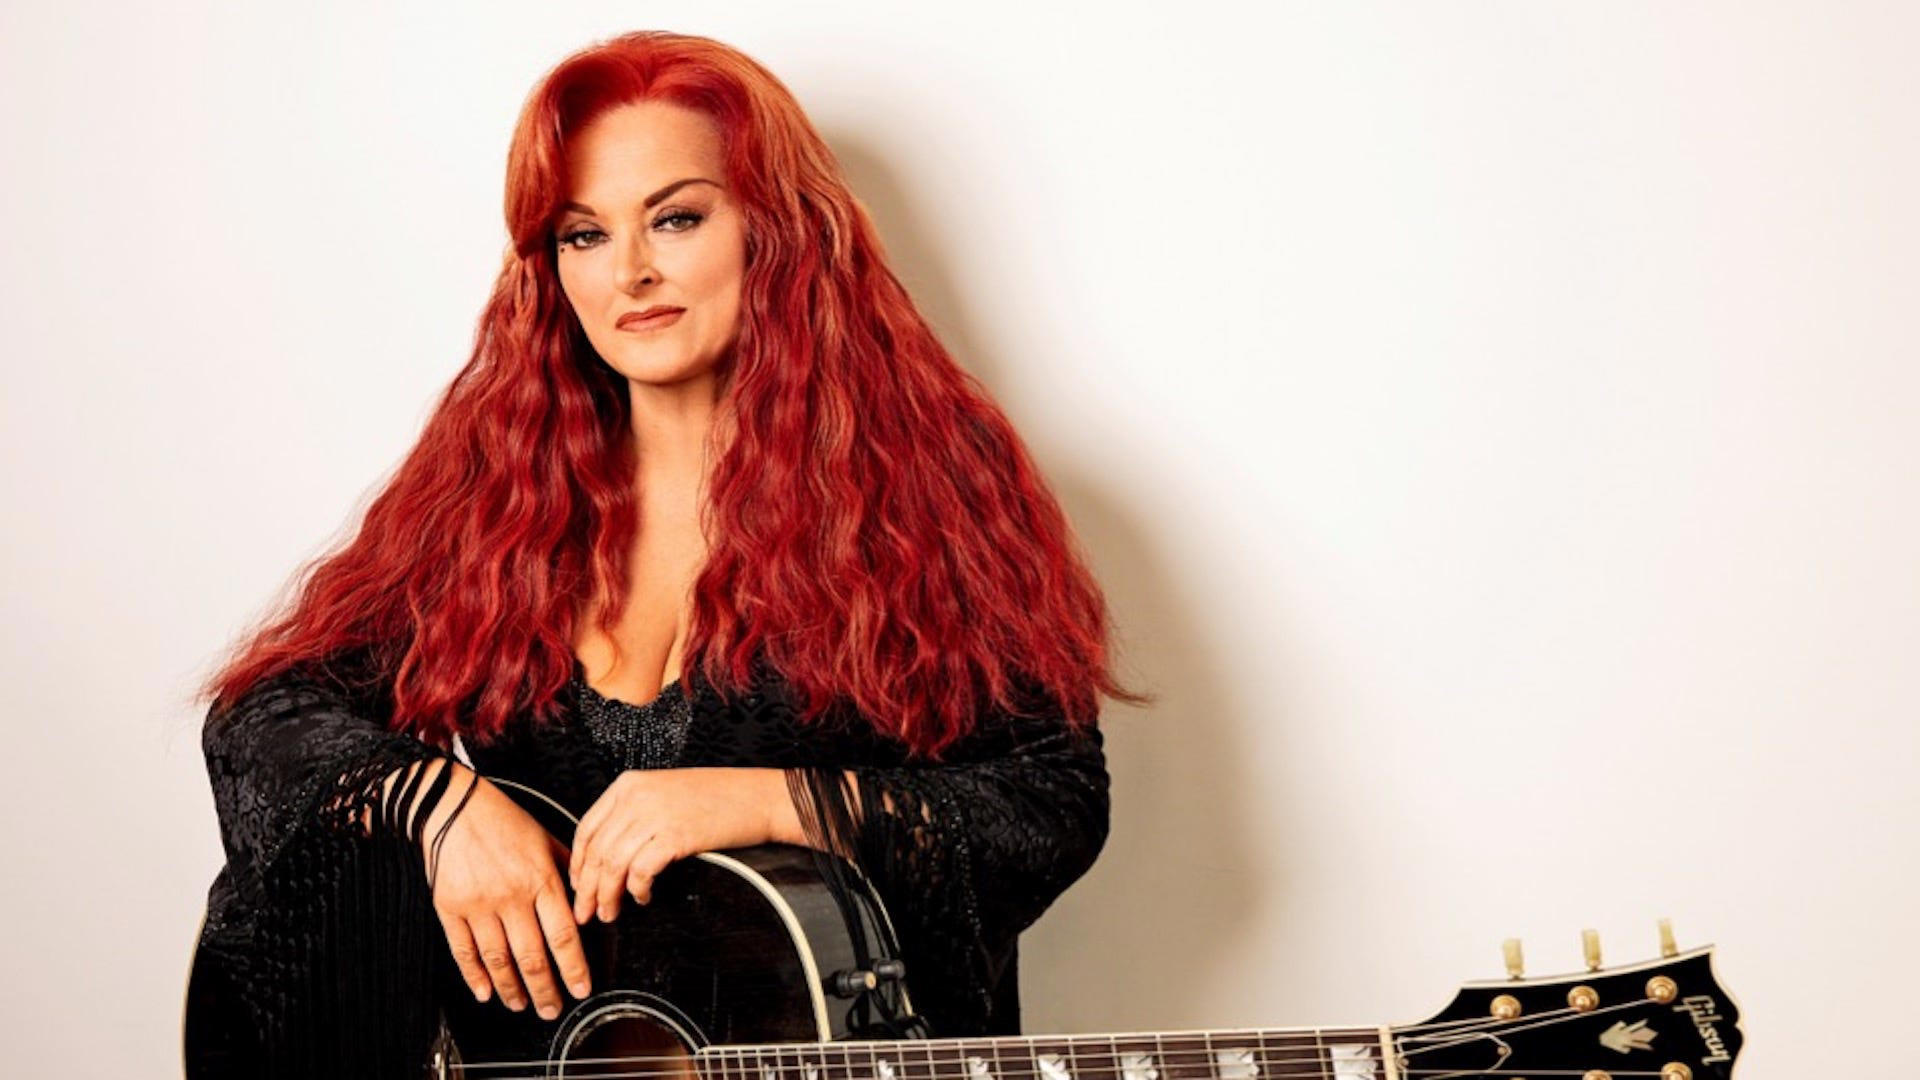 Wynonna Judd shares dates for 'Back To Wy' tour